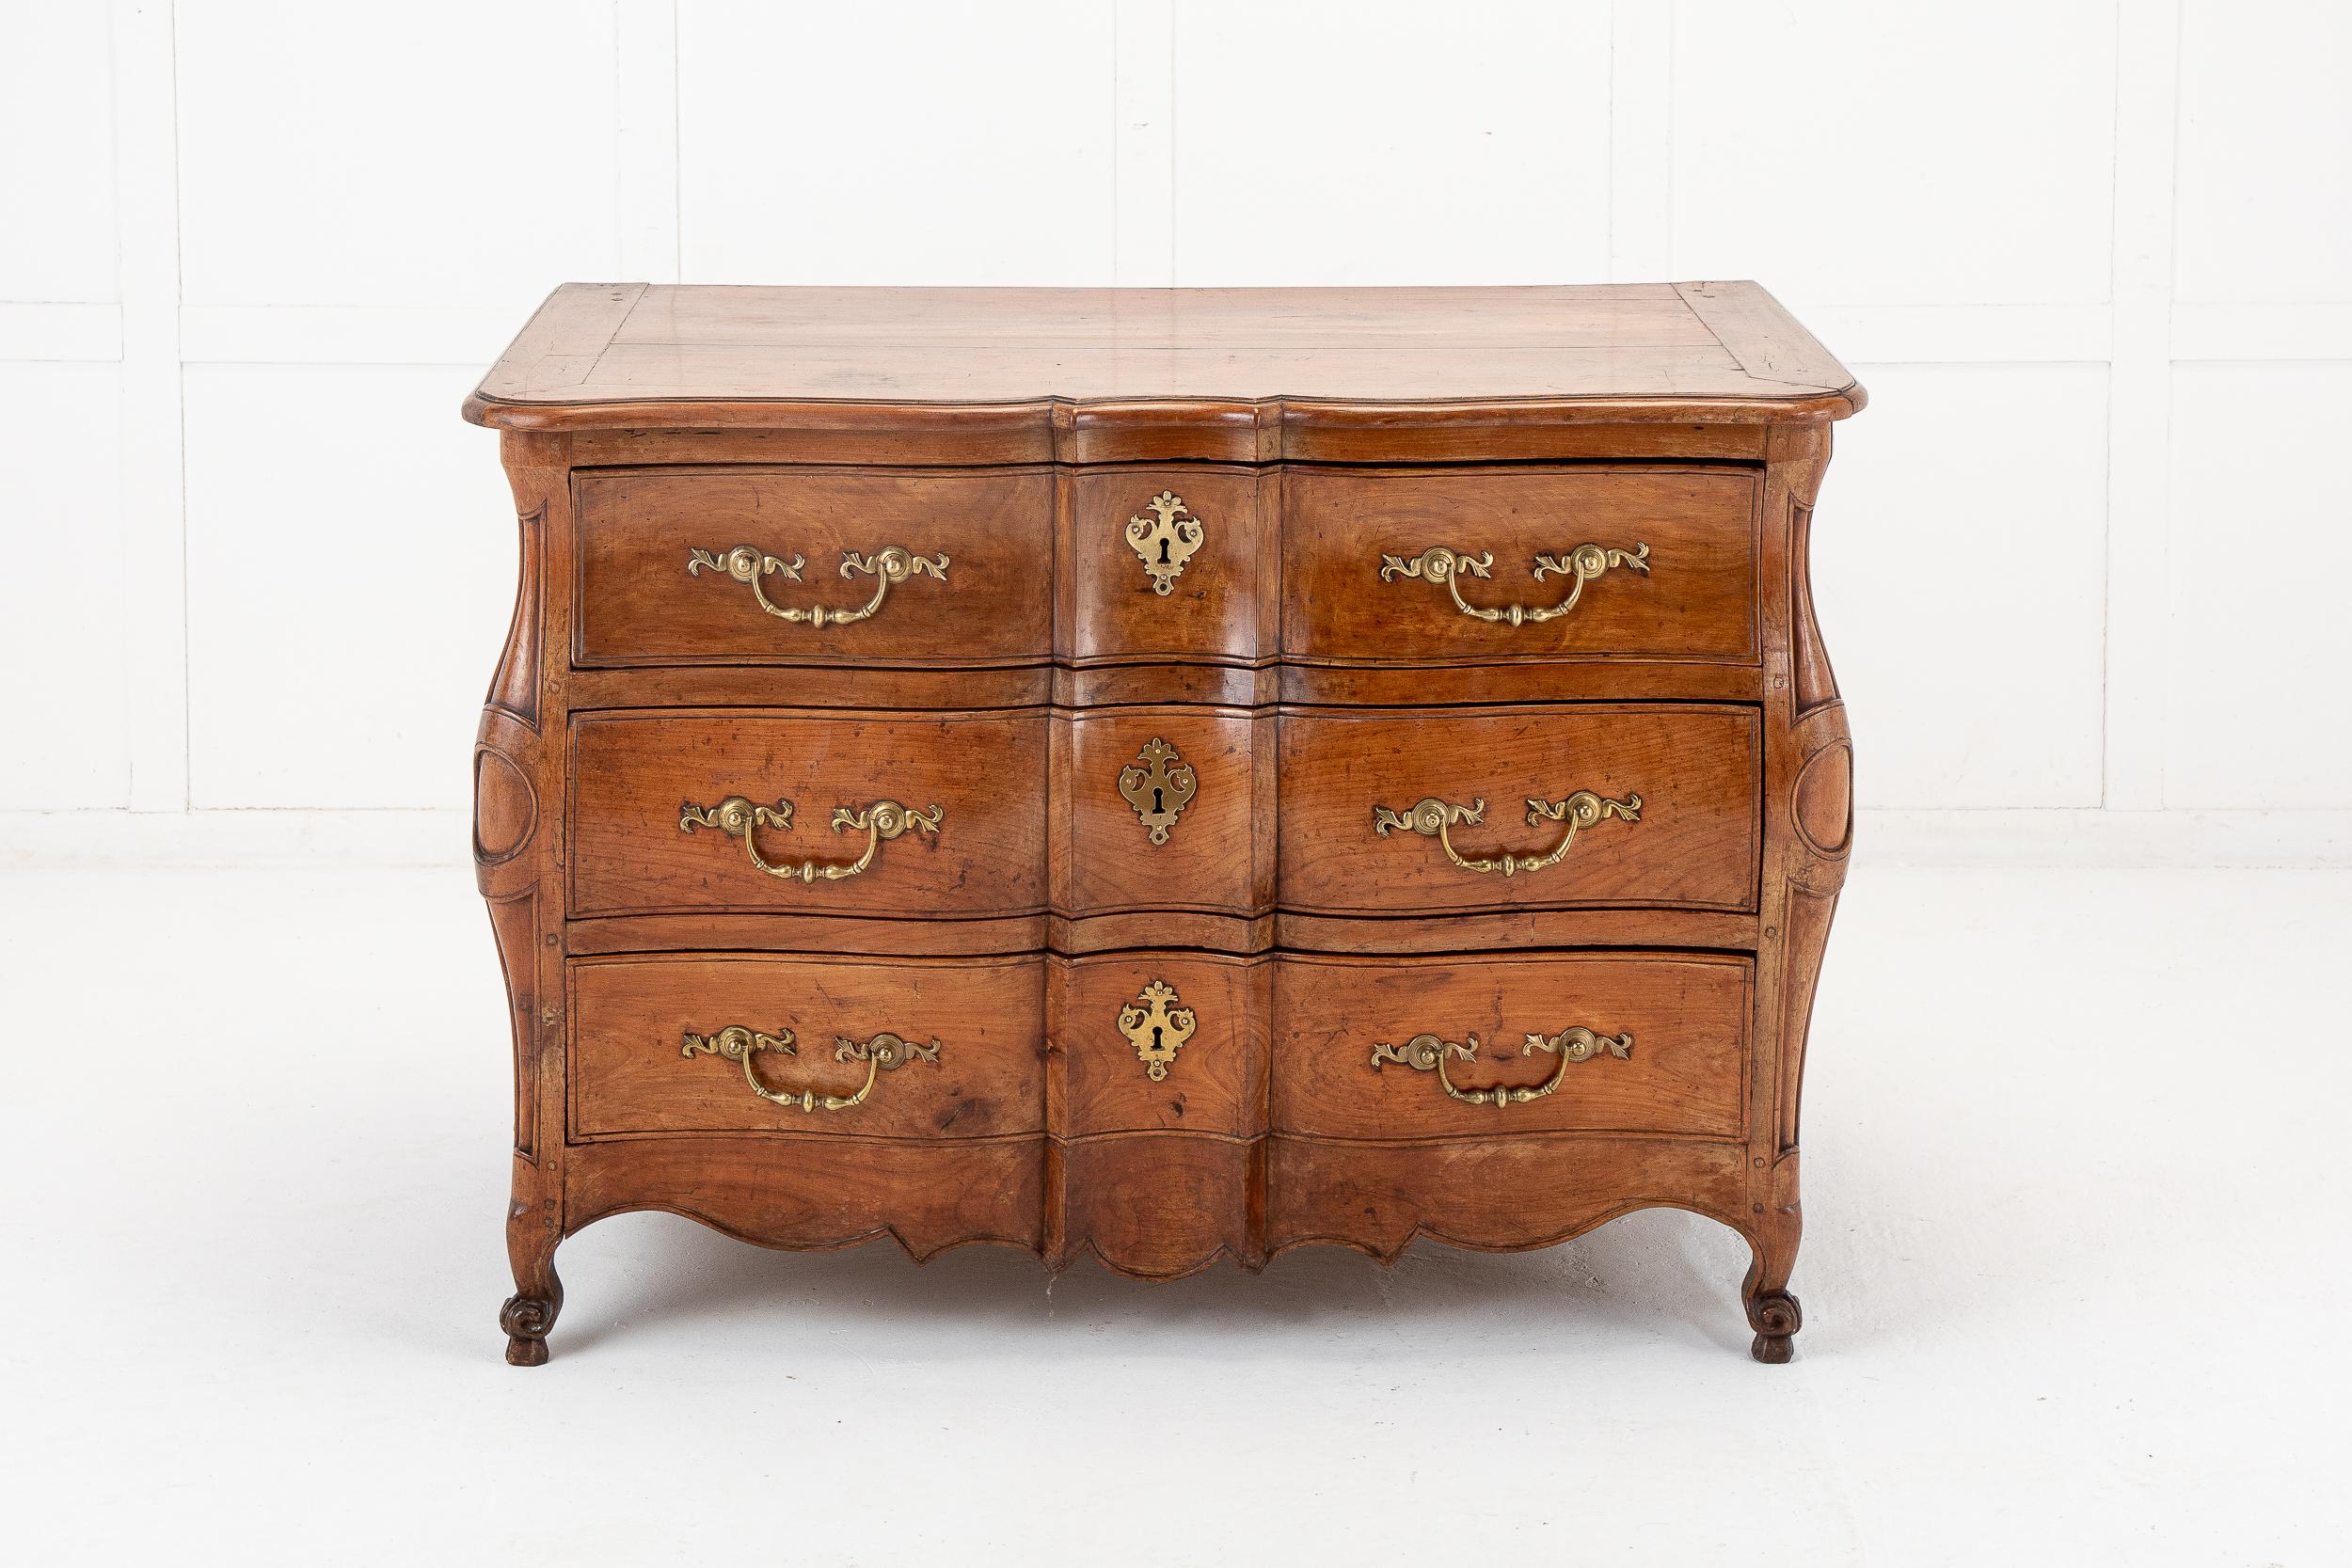 A beautiful 18th Century French cherrywood bombe commode of superb quality, with serpentine form, and all its original metal work. The top with solid planks and moulded edging conforms to the shape below. Having three large drawers with drop bar